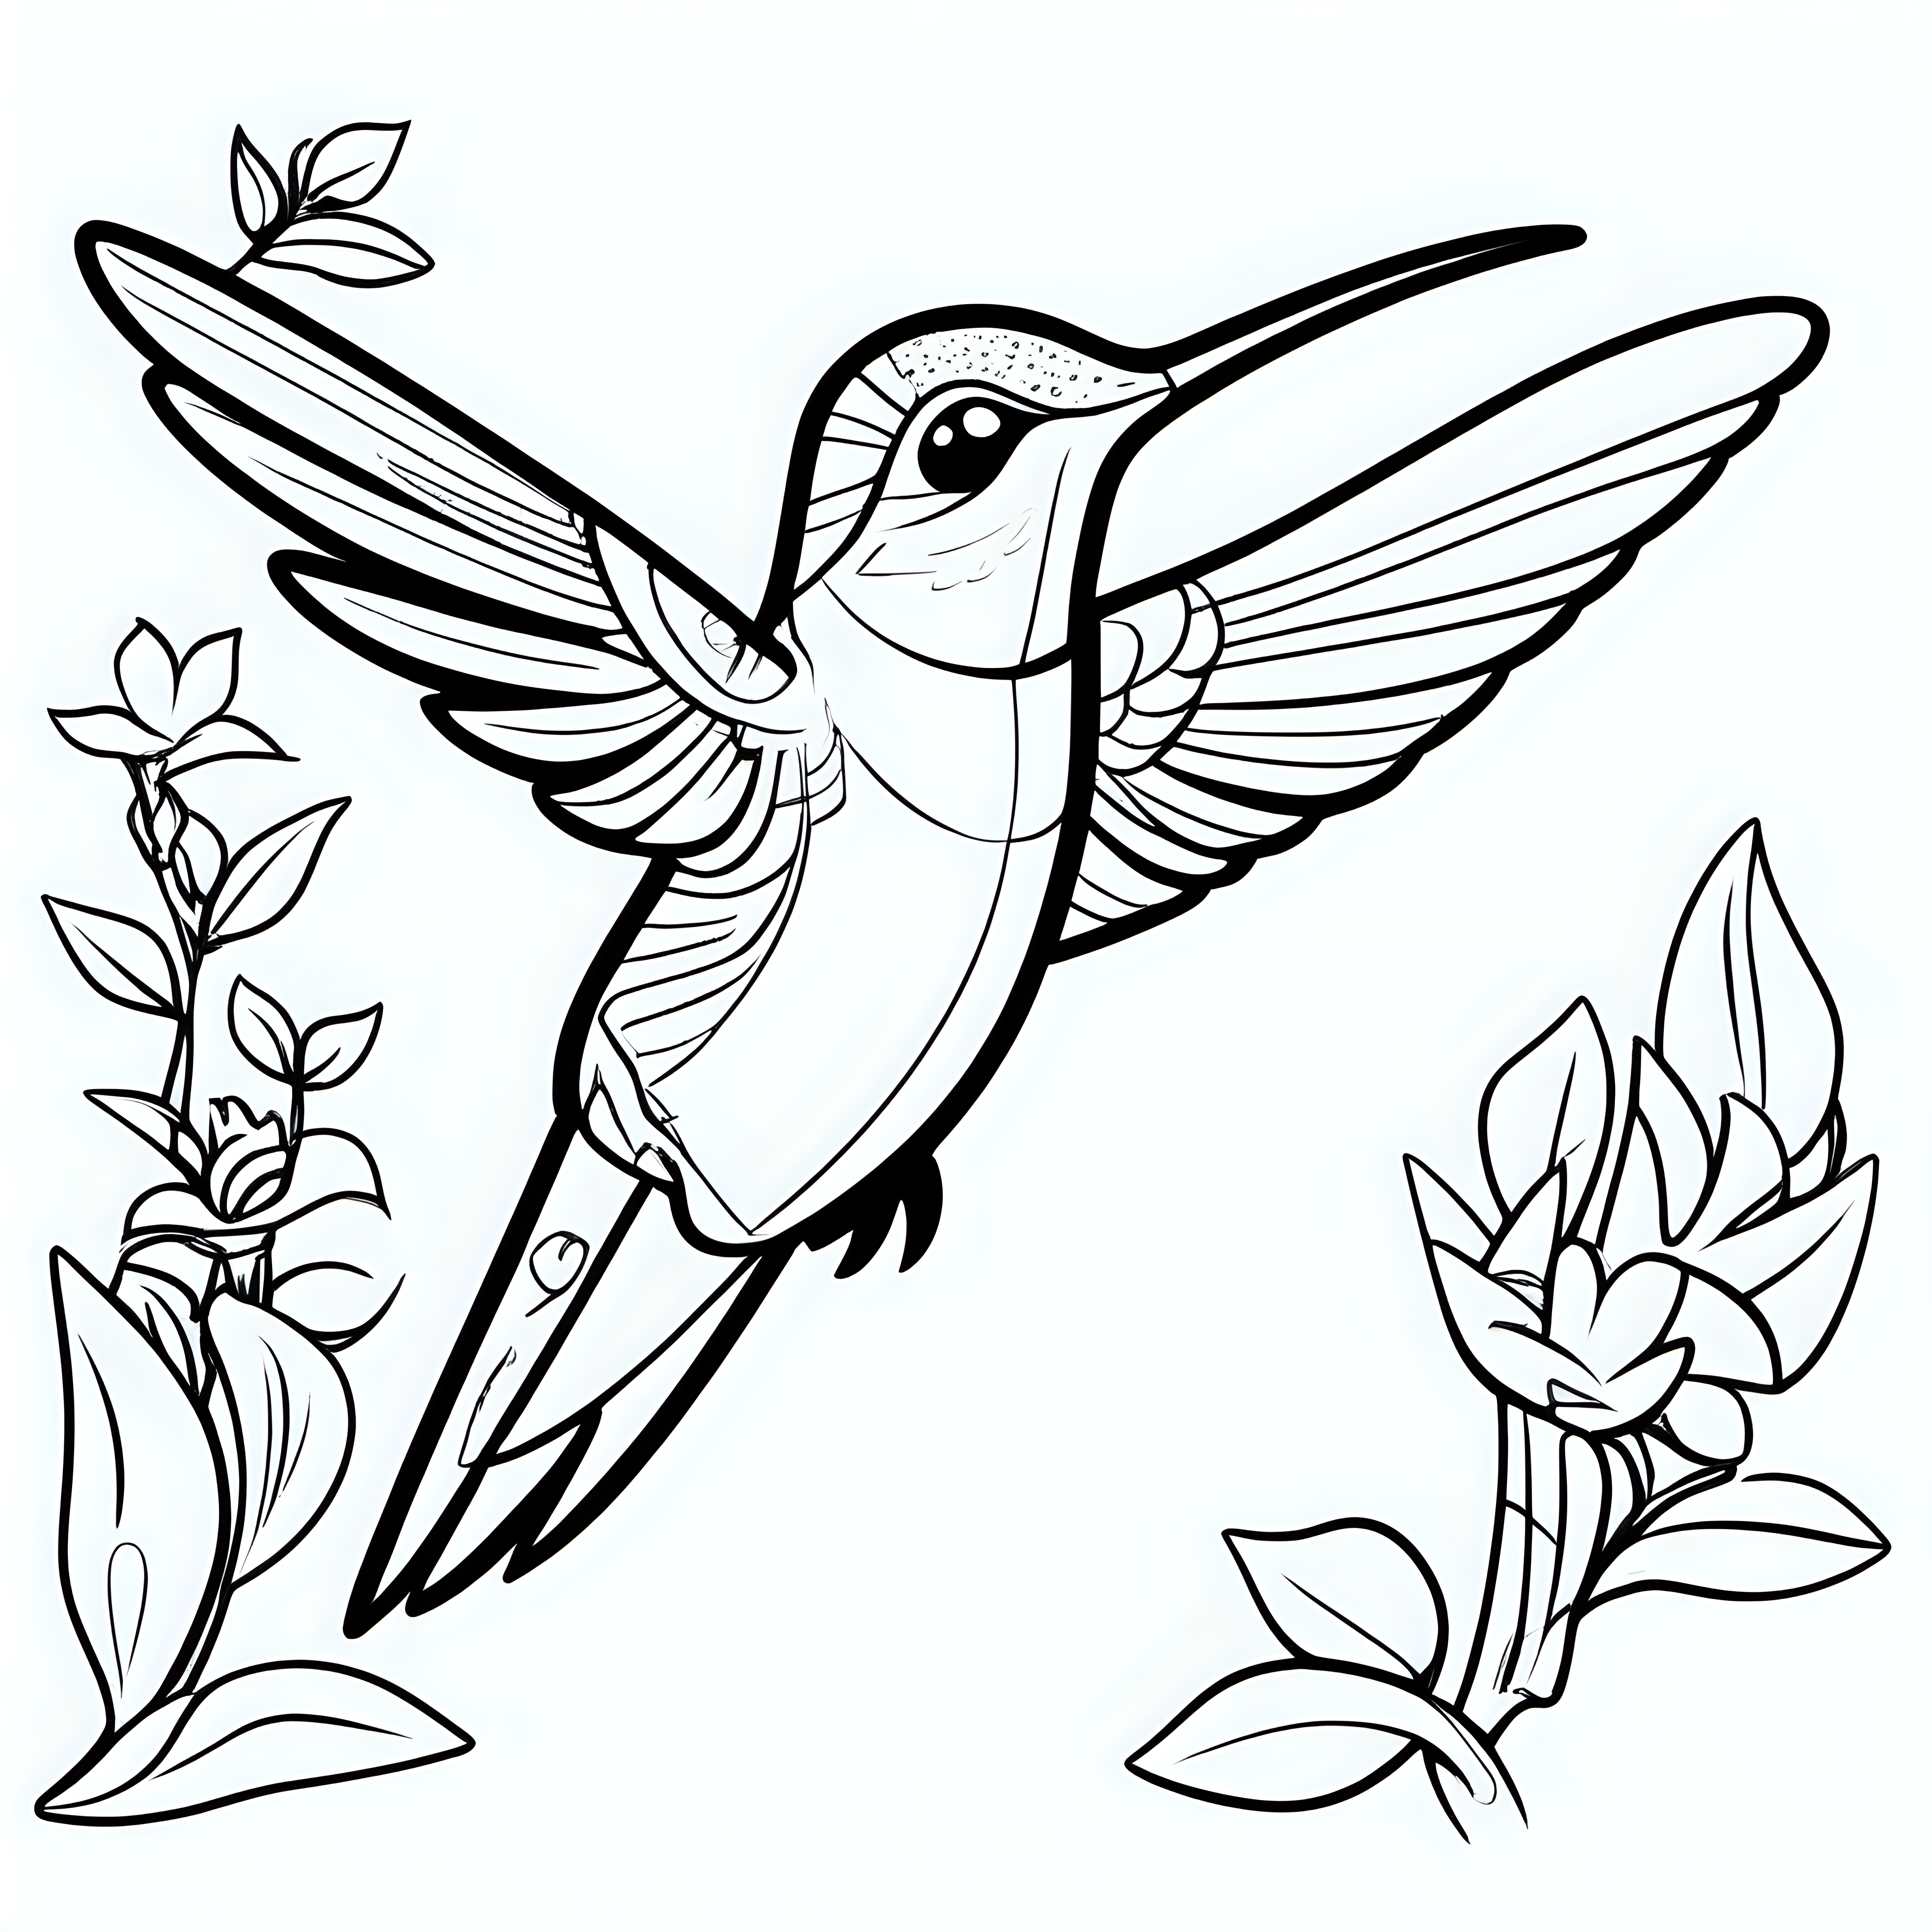 Create a cute Hummingbird bird, outline in black, coloring book for kids